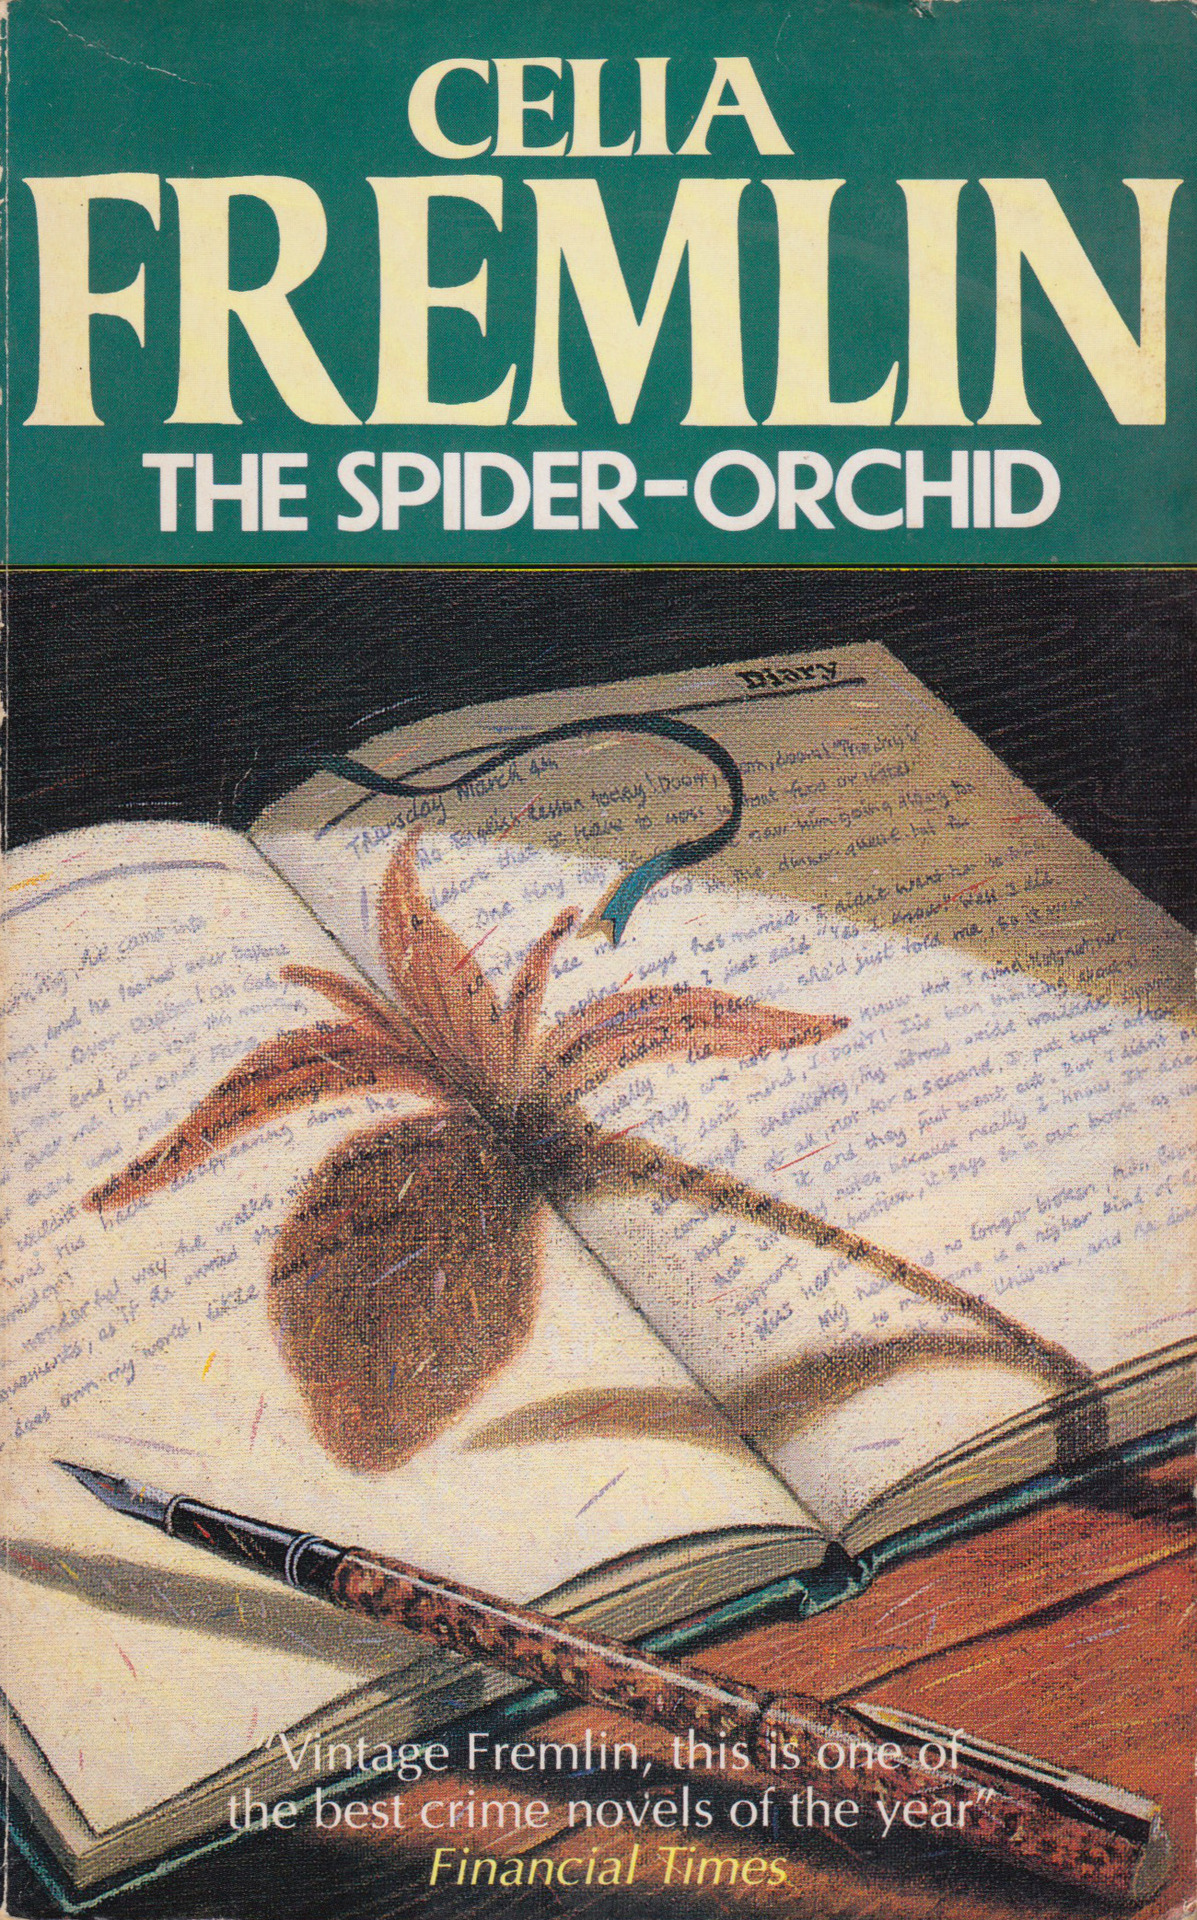 The Spider-Orchid, by Celia Fremlin (Gollancz, 1991).From a charity shop in Nottingham.